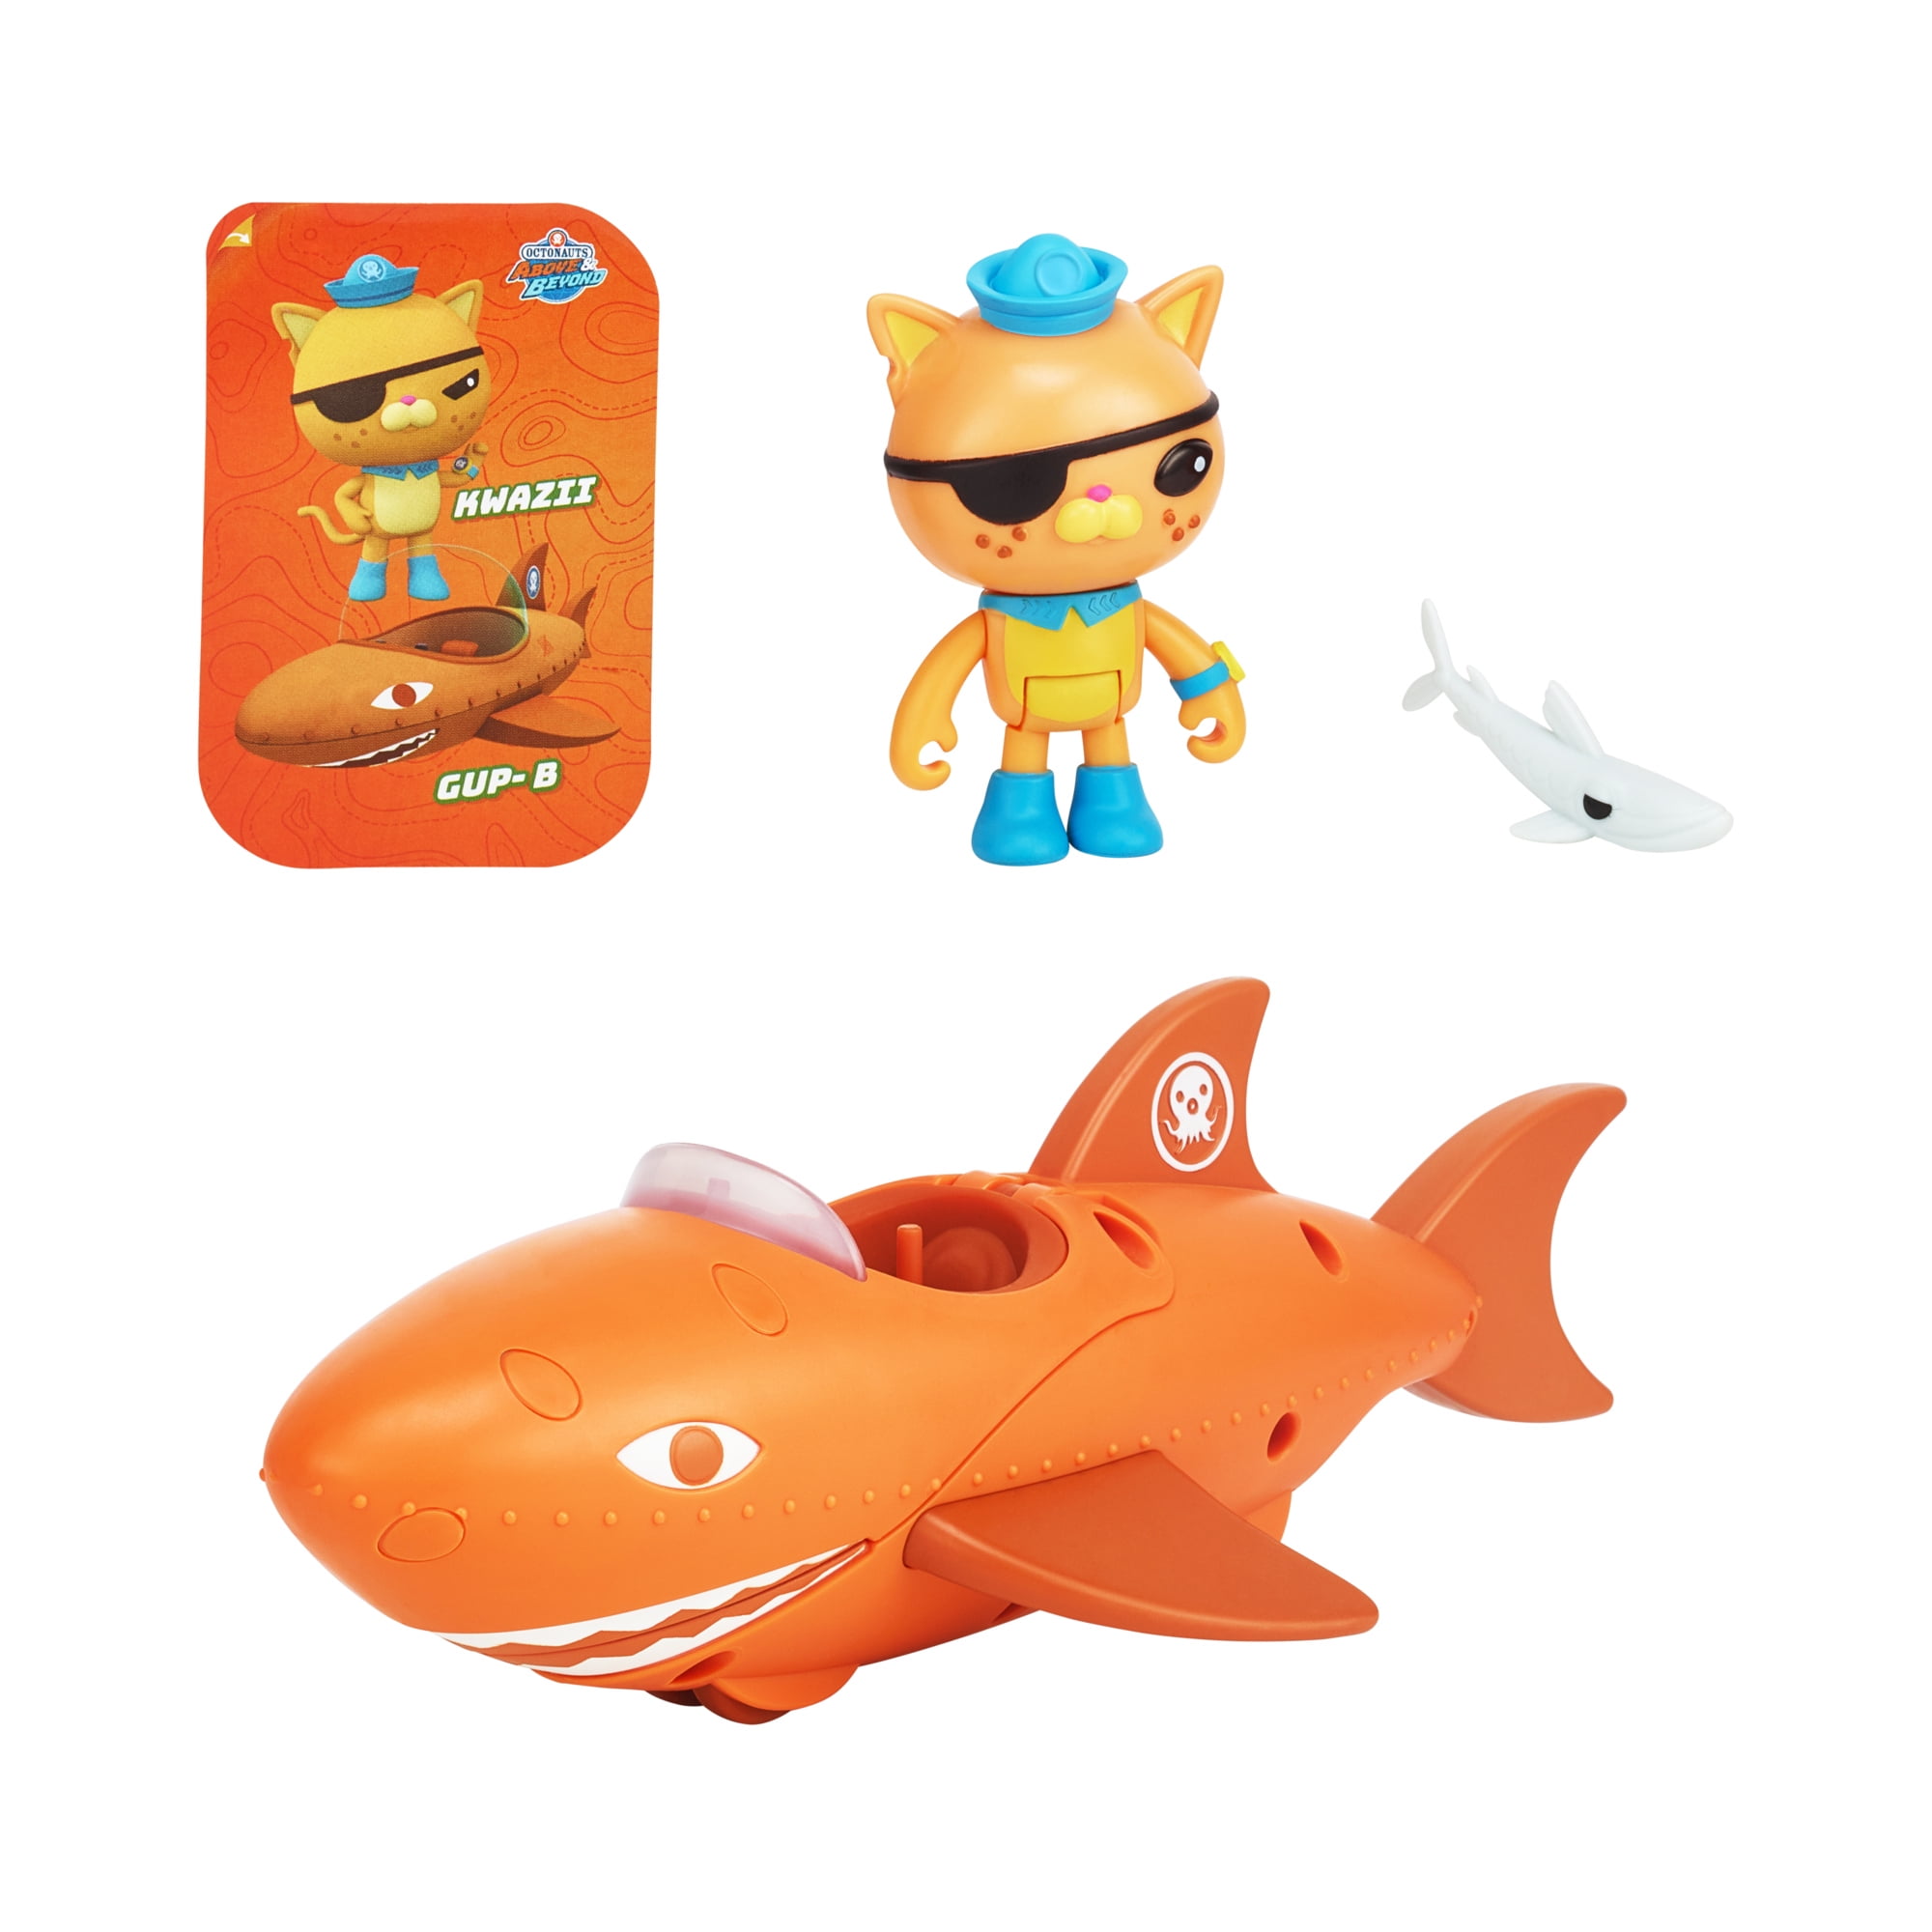 Octonauts Above & Beyond, Kwazii & Gup B Adventure Pack, Deluxe Toy Vehicle & 3 inch Figure, Preschool, Ages 3+